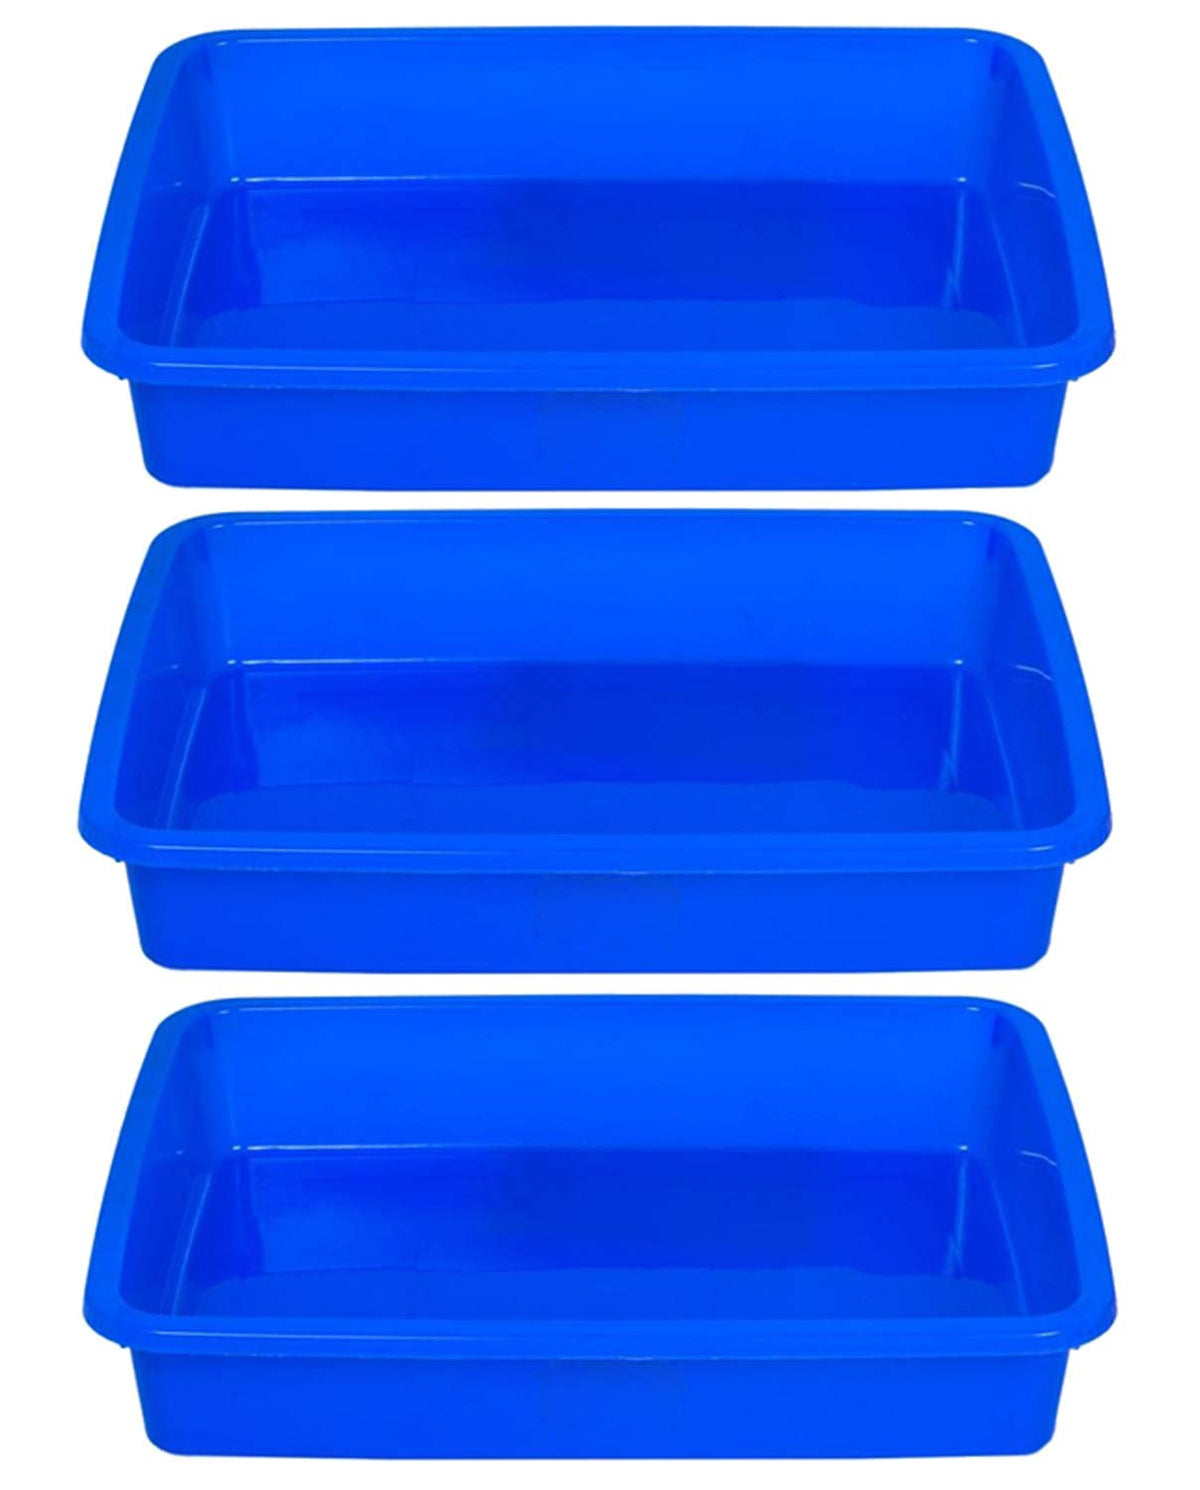 Kuber Industries Plastic 3 Pieces Small Size Stationary Office Tray, File Tray, Document Tray, Paper Tray A4 Documents/Papers/Letters/folders Holder Desk Organizer (Blue) CTKTC134792